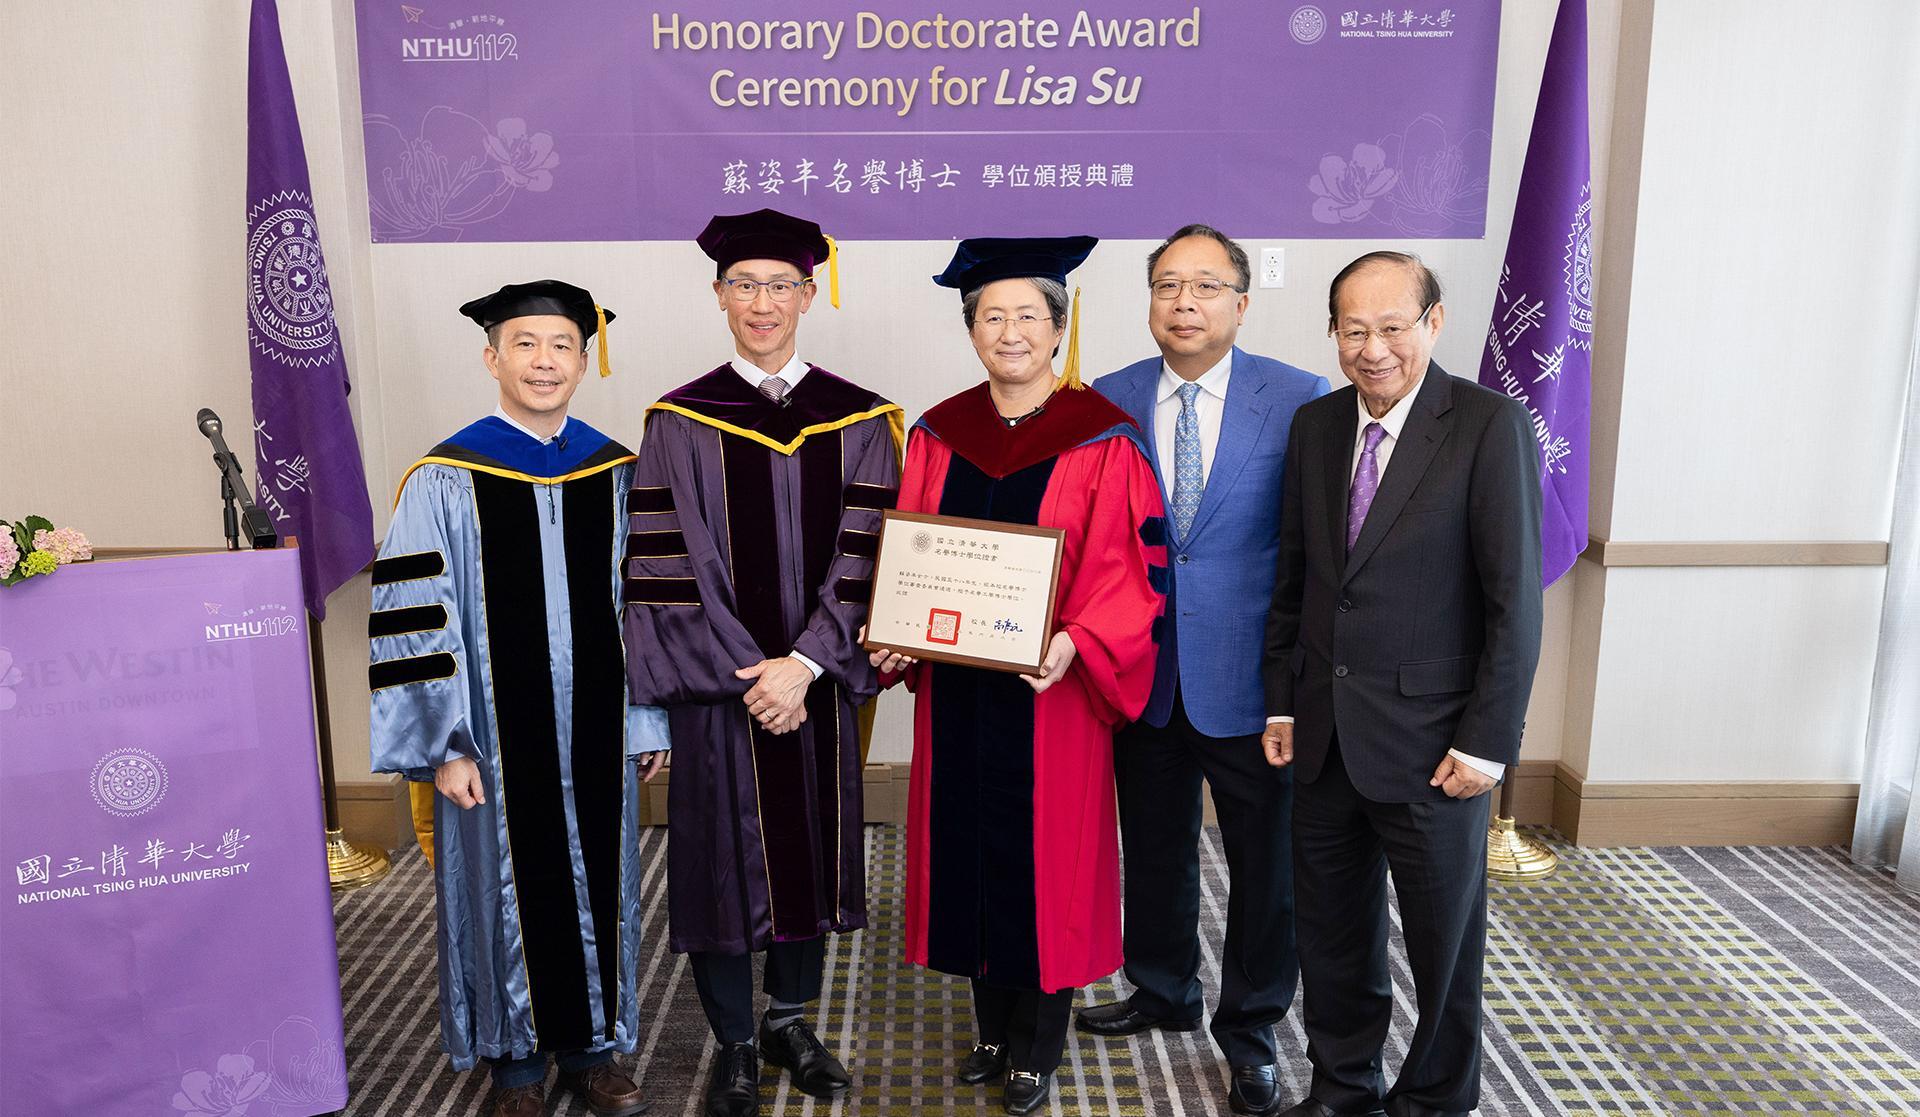 Lisa Su received the honorary doctorate from NTHU. From left, Dean Shawn Shuo-Hung Hsu (徐碩鴻) of the College of Electrical and Computer Science, President W. John Kao (高為元), Lisa Su (蘇姿丰), her husband Daniel Lin (丹尼爾‧林), and her father Chun-hwai Su (蘇春槐).